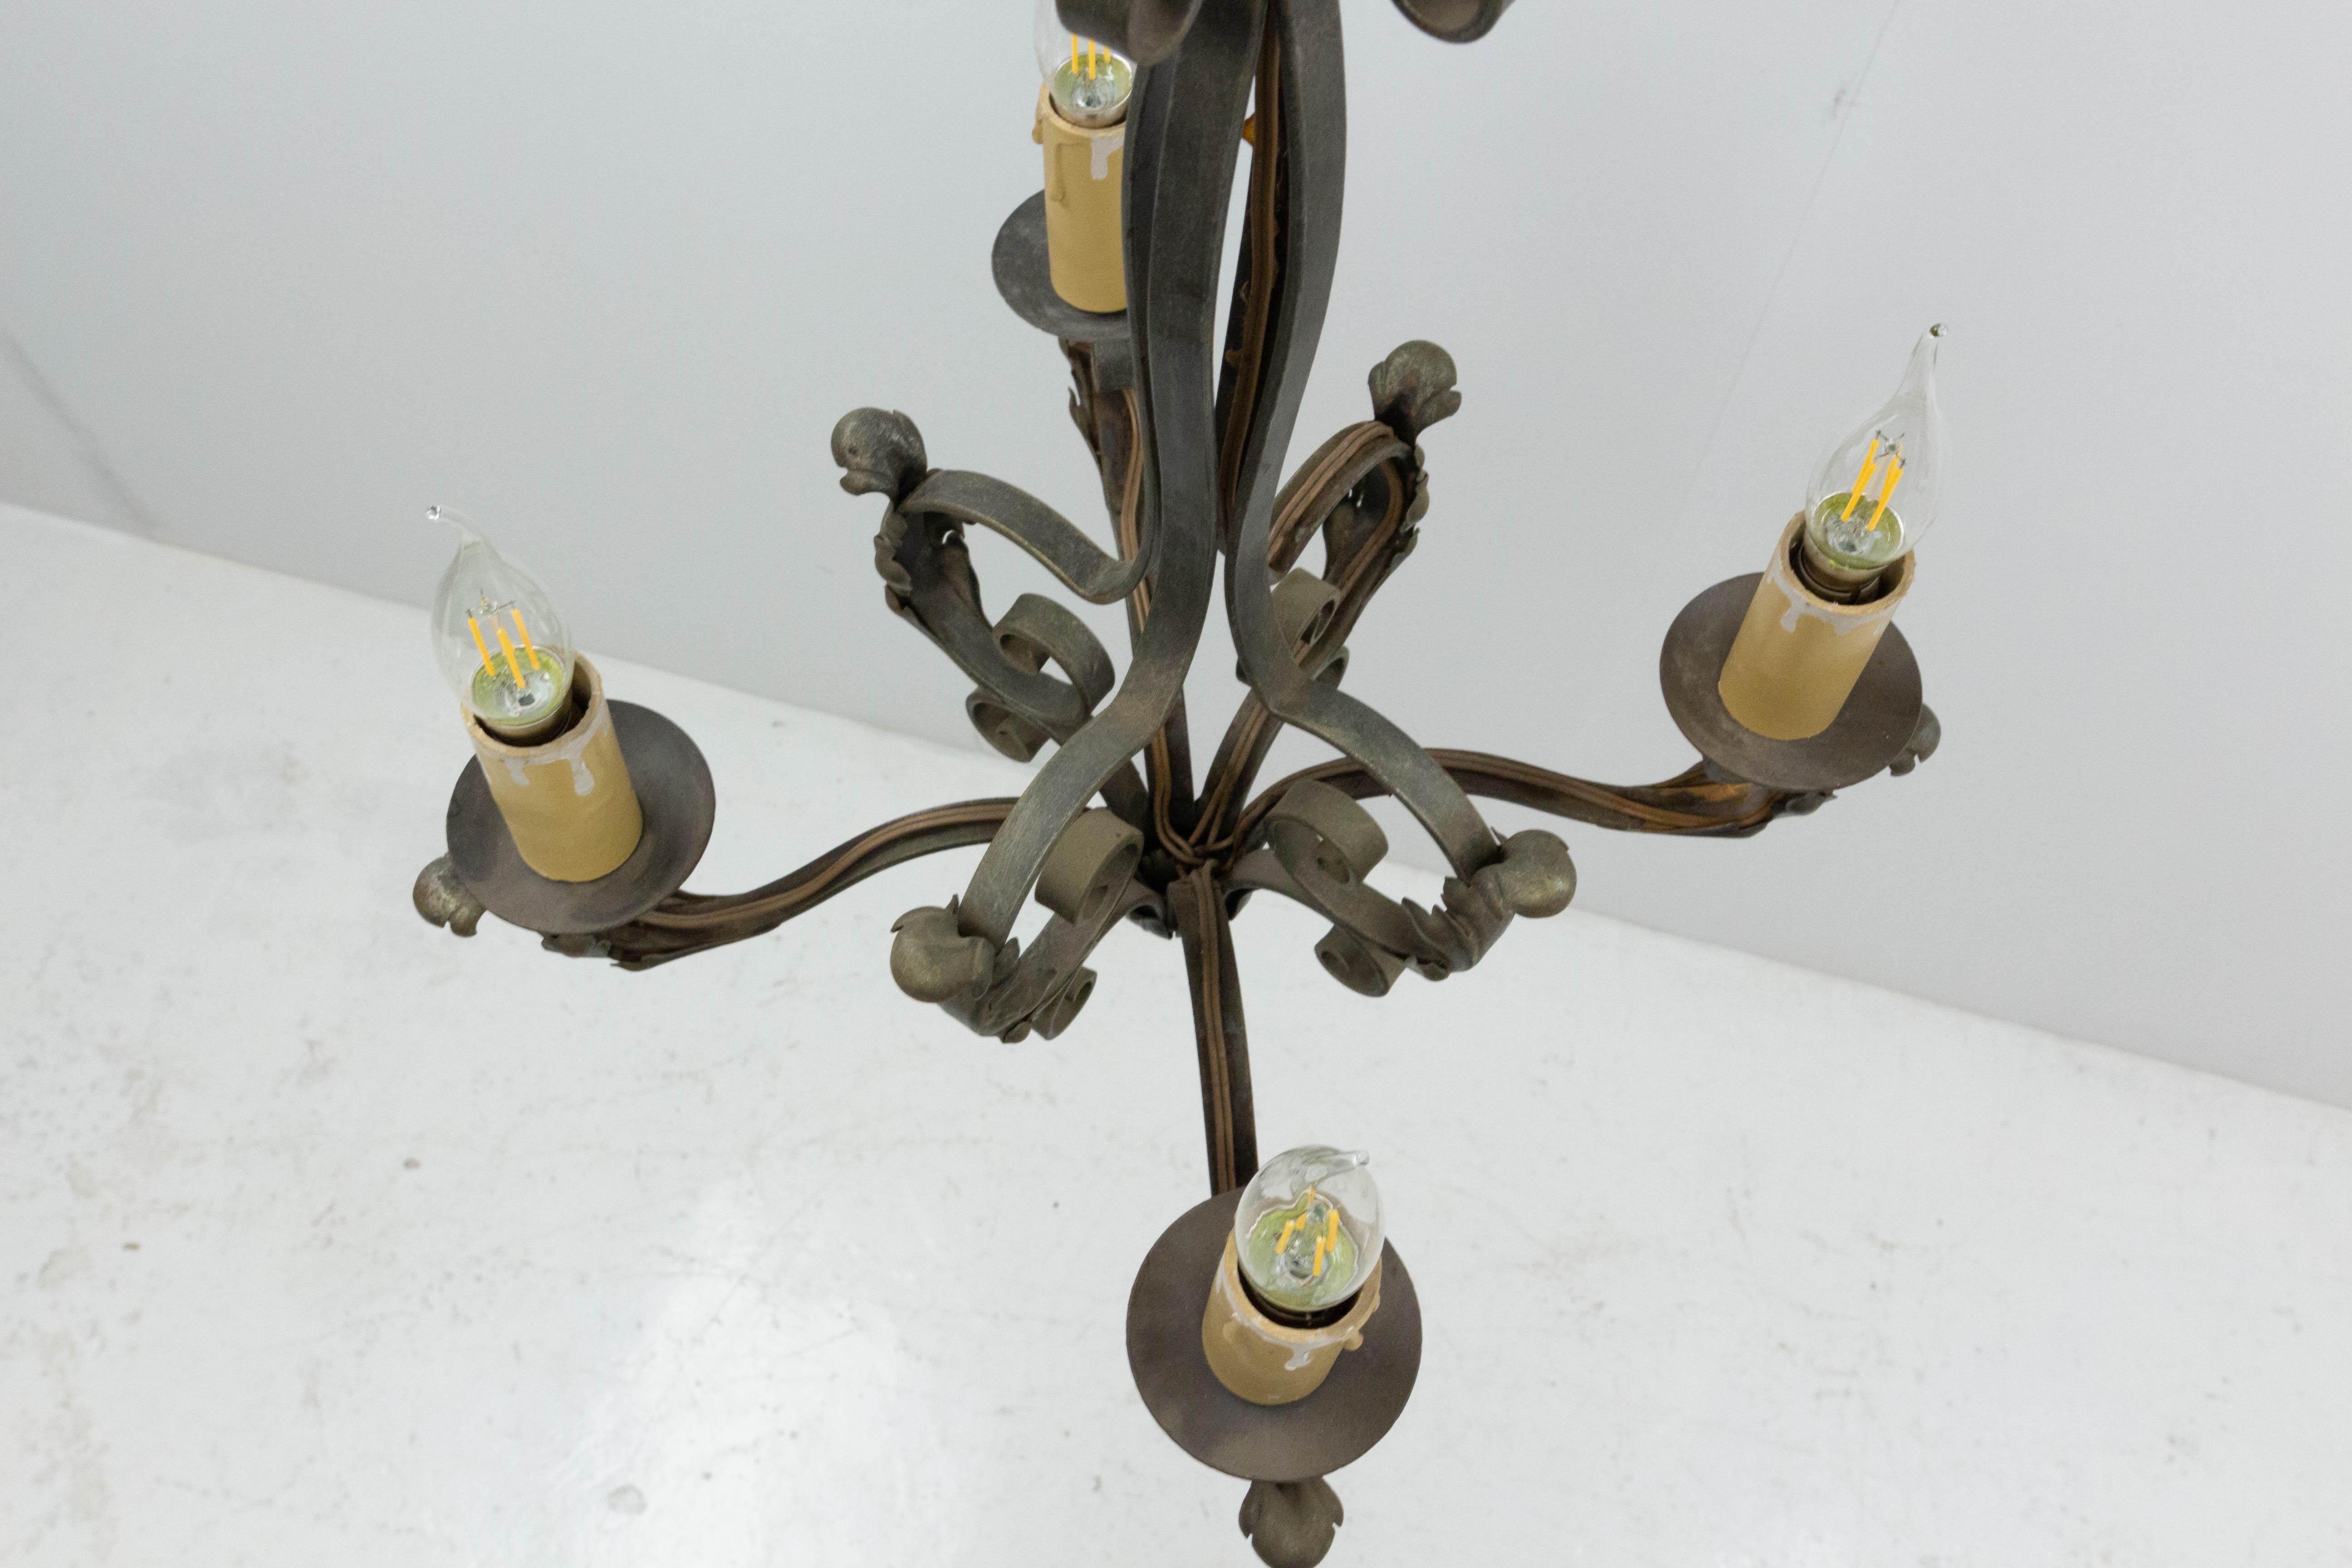 Art Deco chandelier or lustre, French
Wrought iron with Acanthus Leaves
1930
Good condition.
This can be rewired to USA or EU and UK standards.

Shipping:
D 50 H 54 3.1kg.